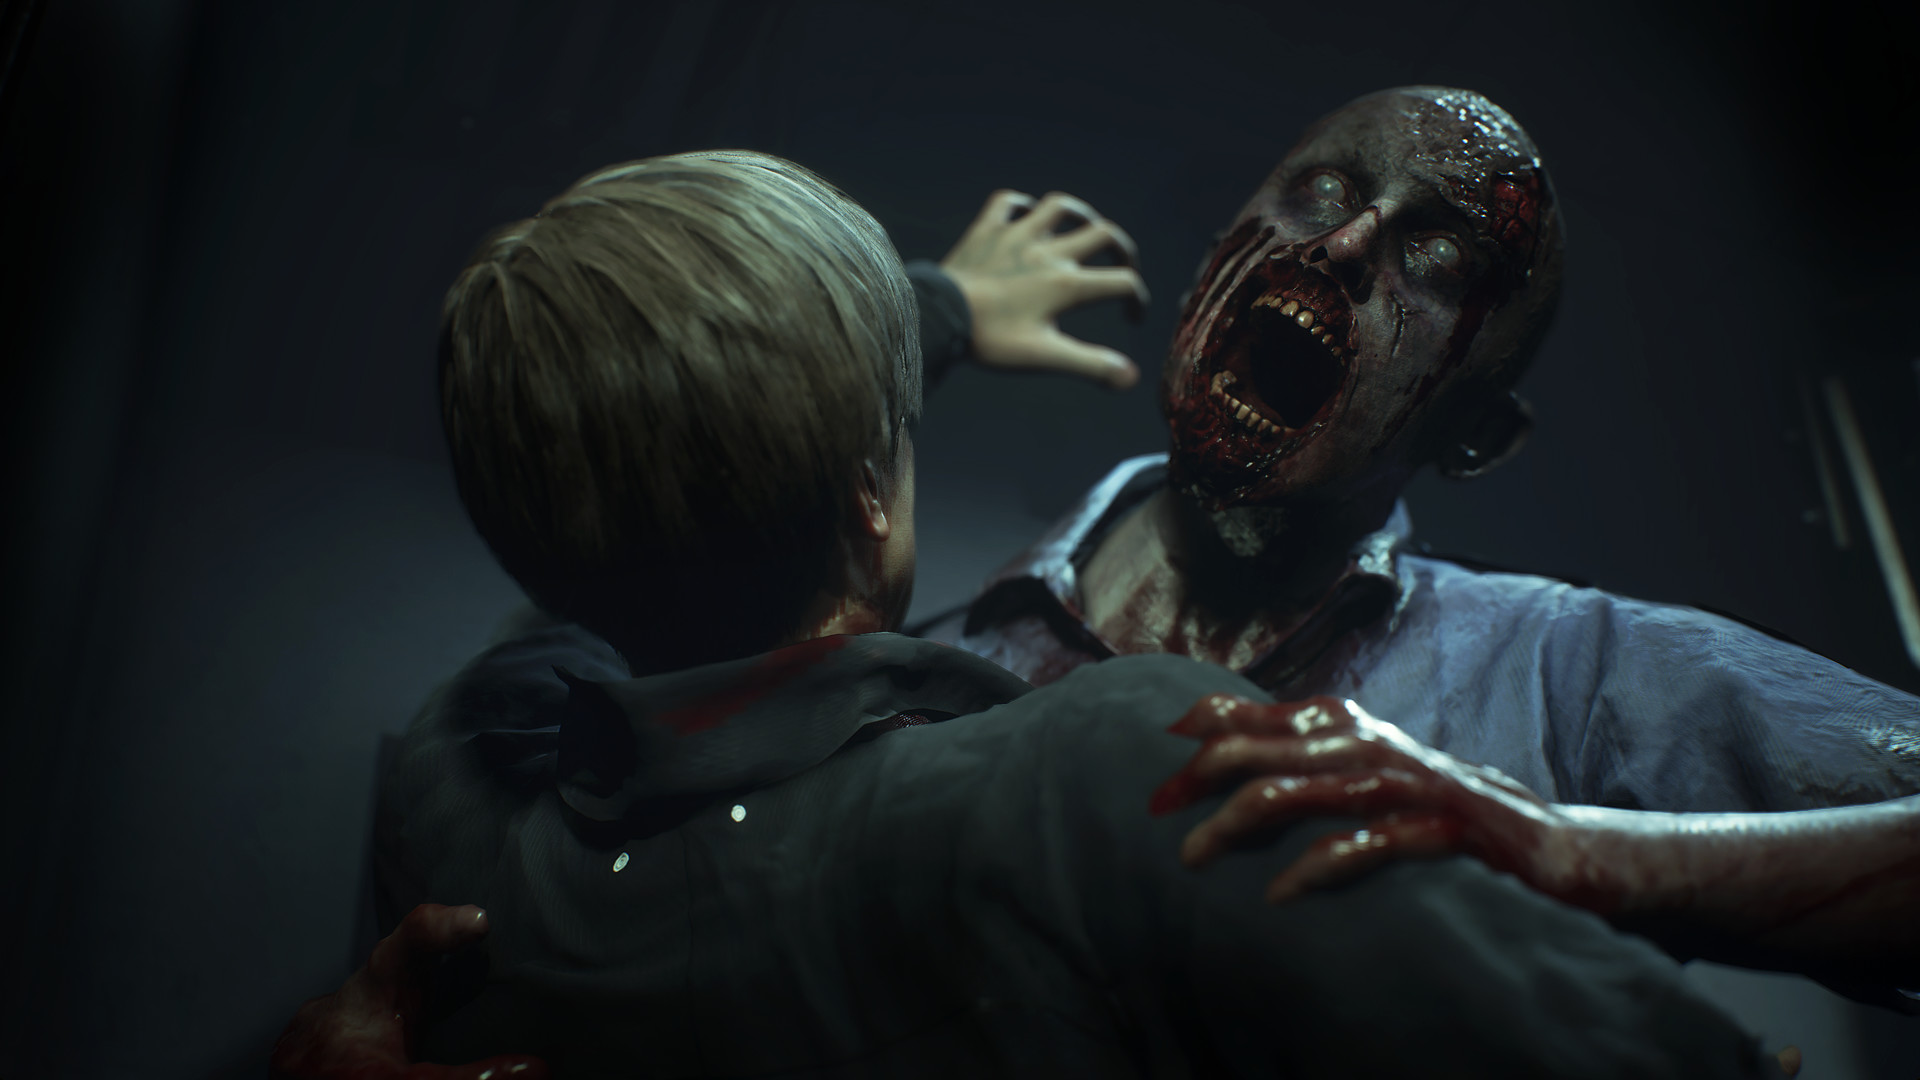 Resident Evil 2 PlayStation 4 Account Pixelpuffin.net Activation Link